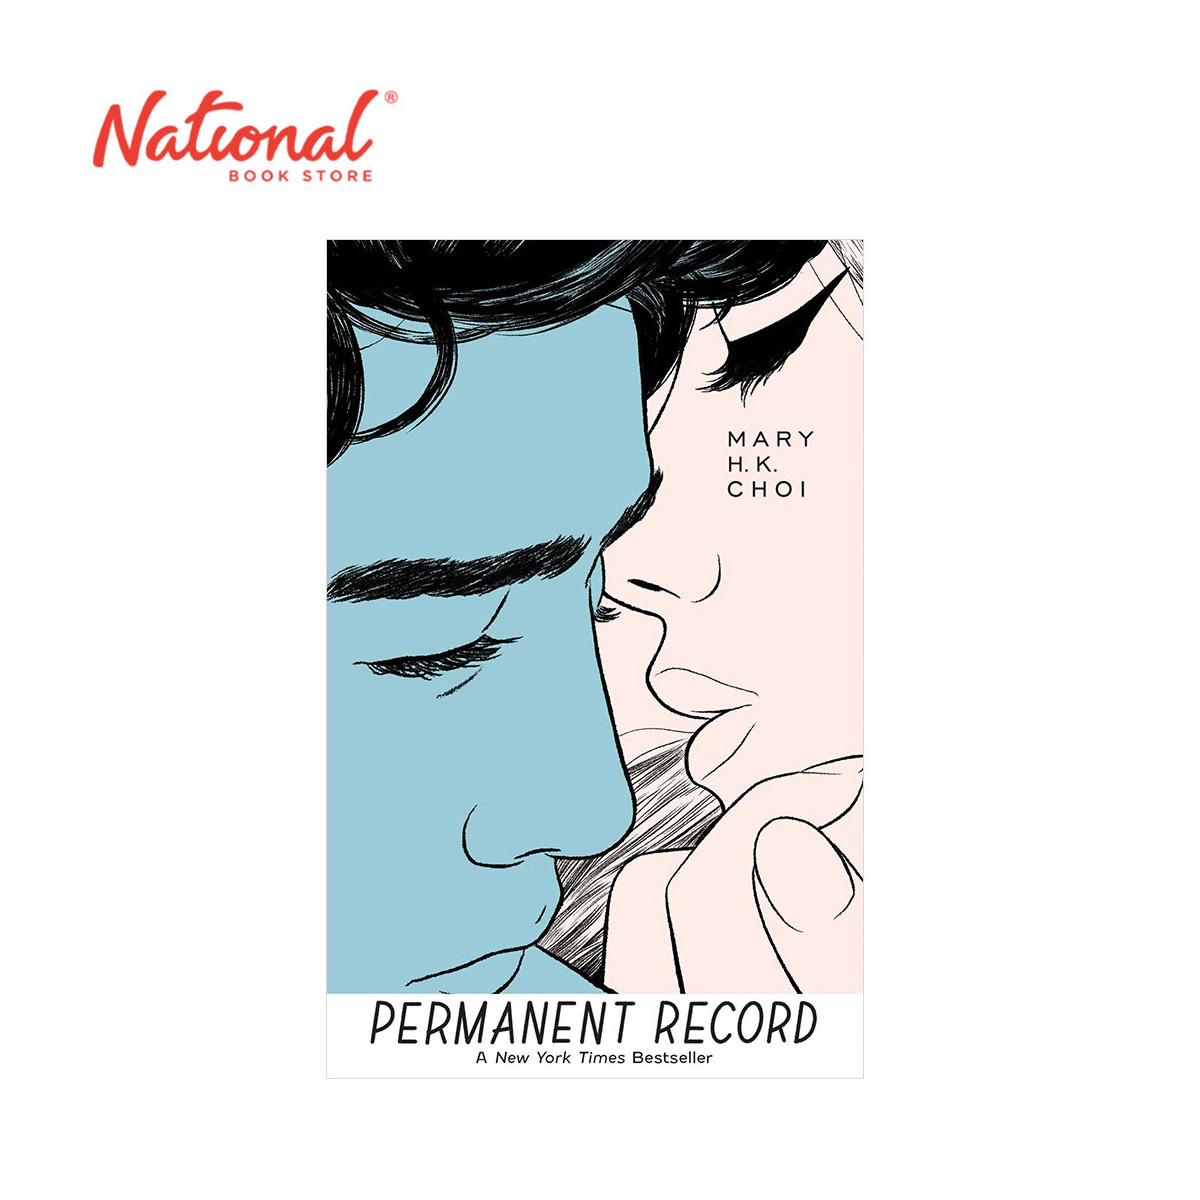 Permanent Record by Mary H. K. Choi - Trade Paperback - Teens Romance